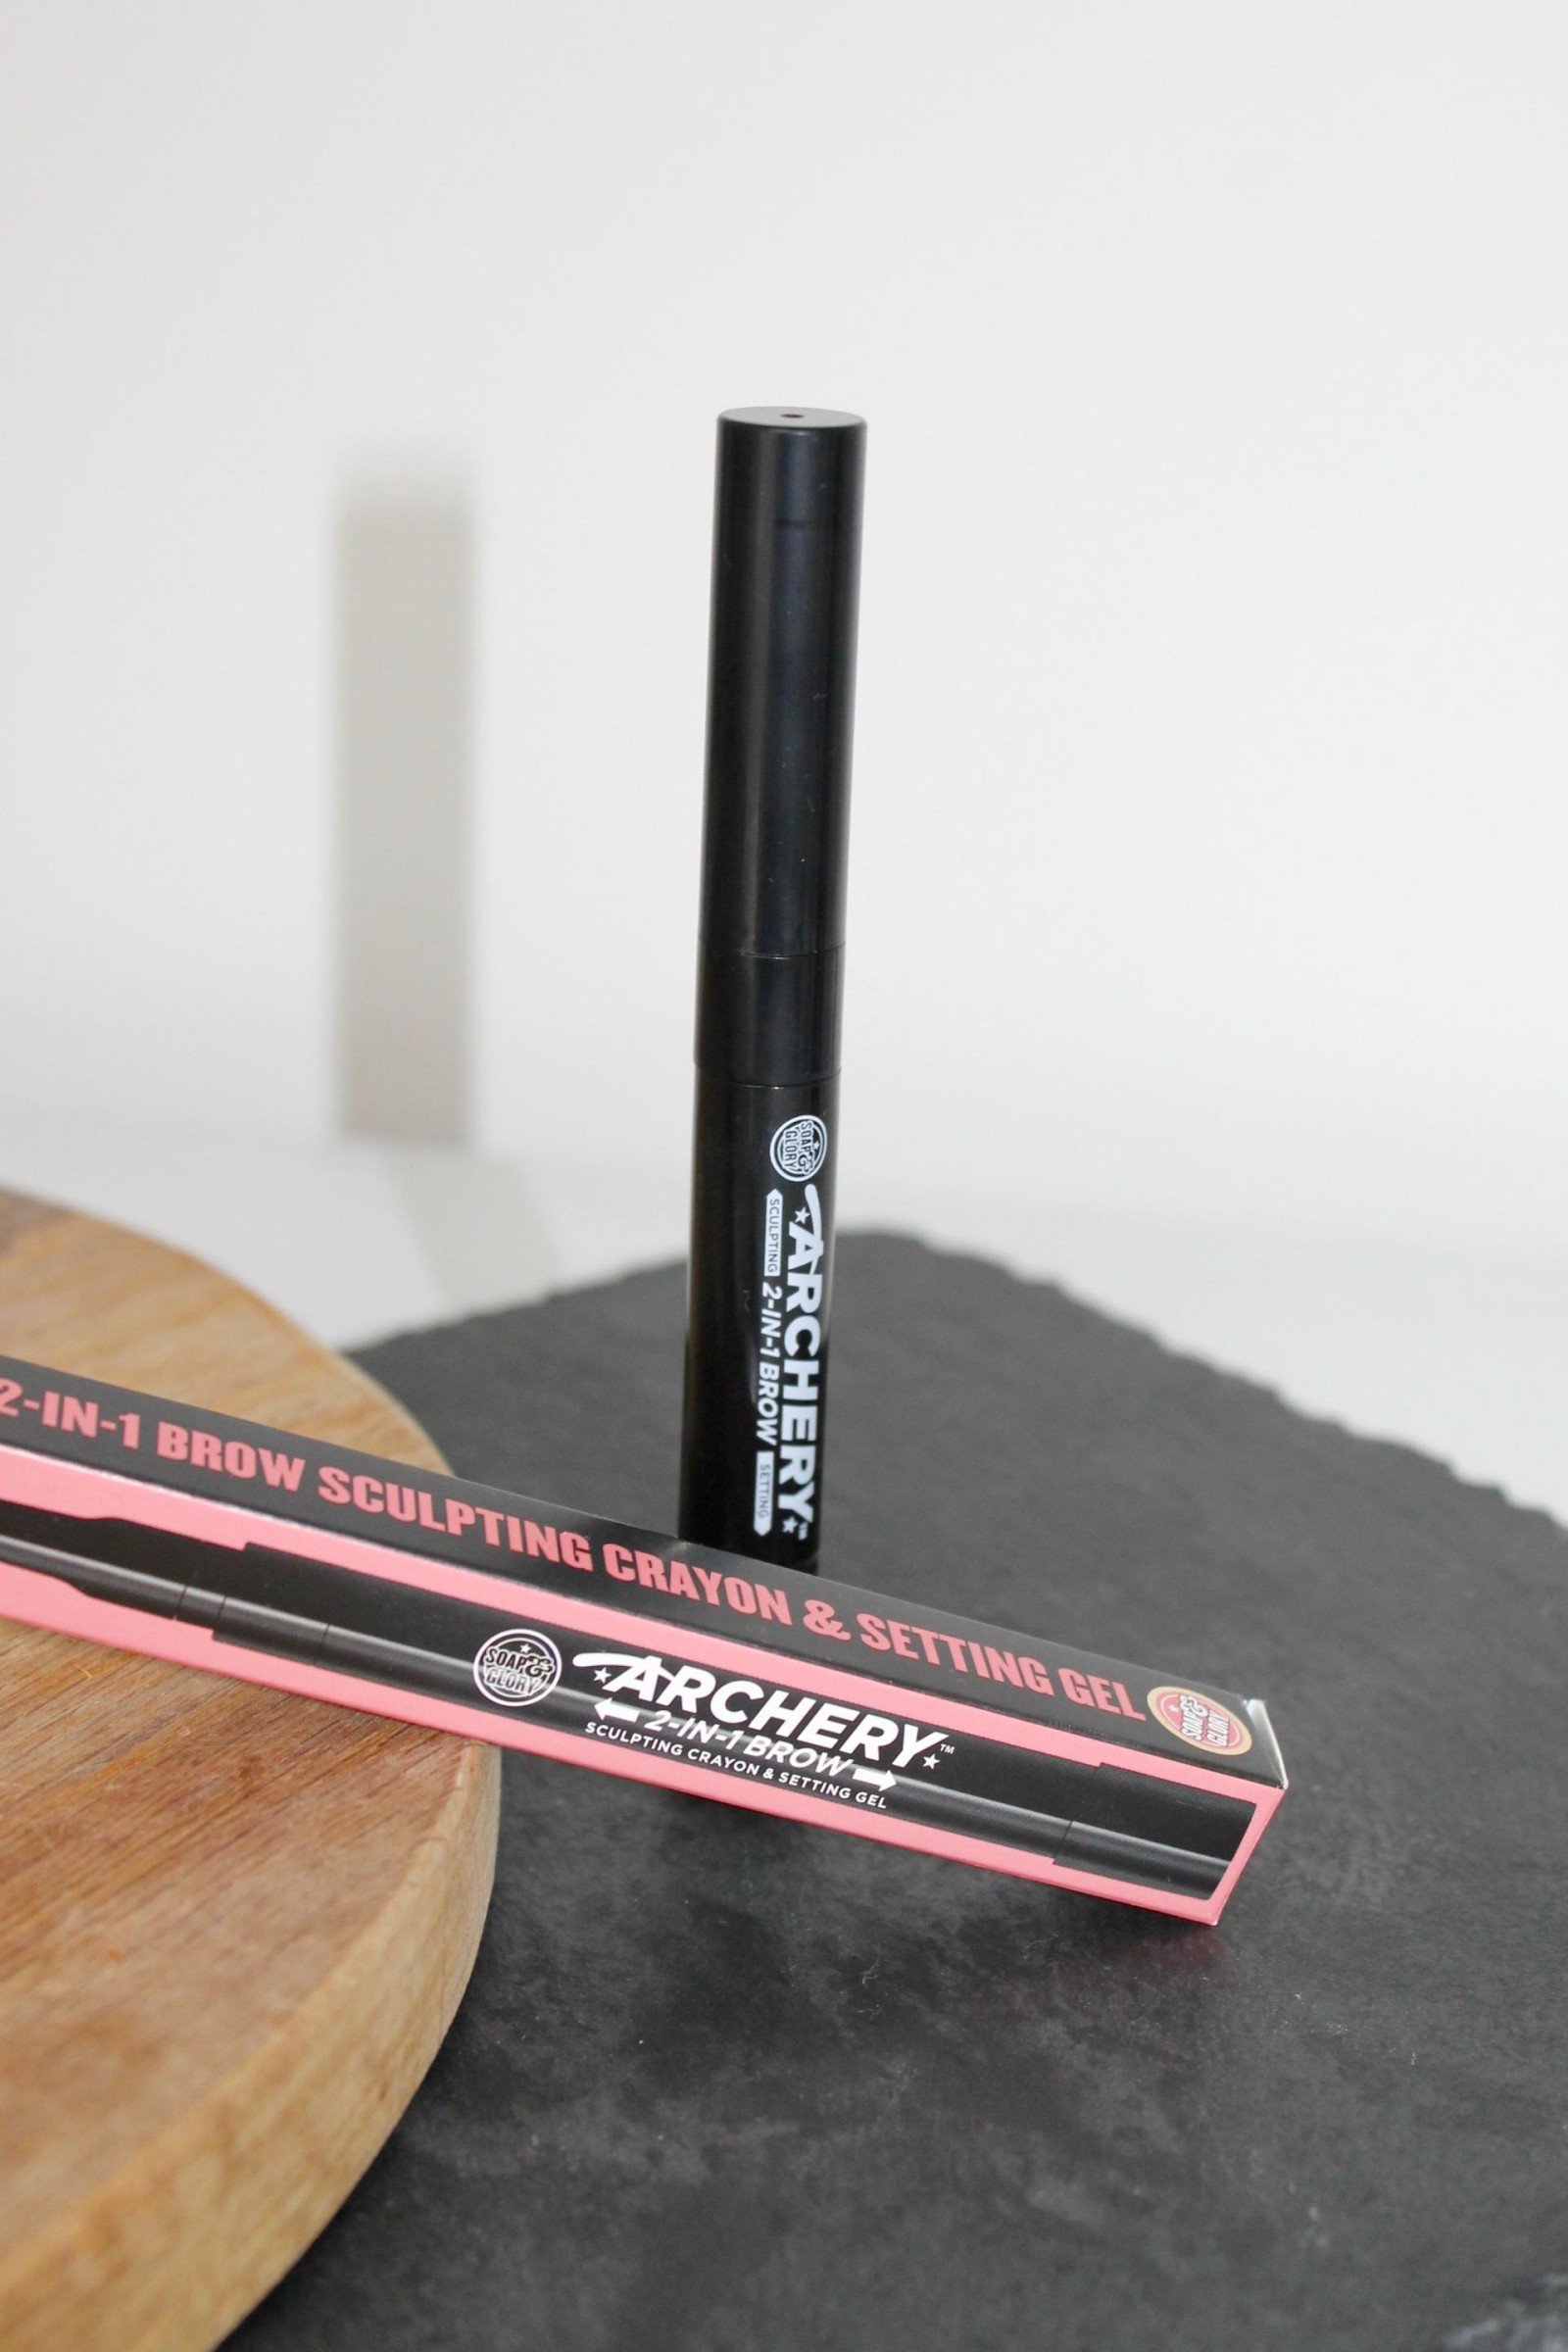 Soap and Glory Brow Archery Review